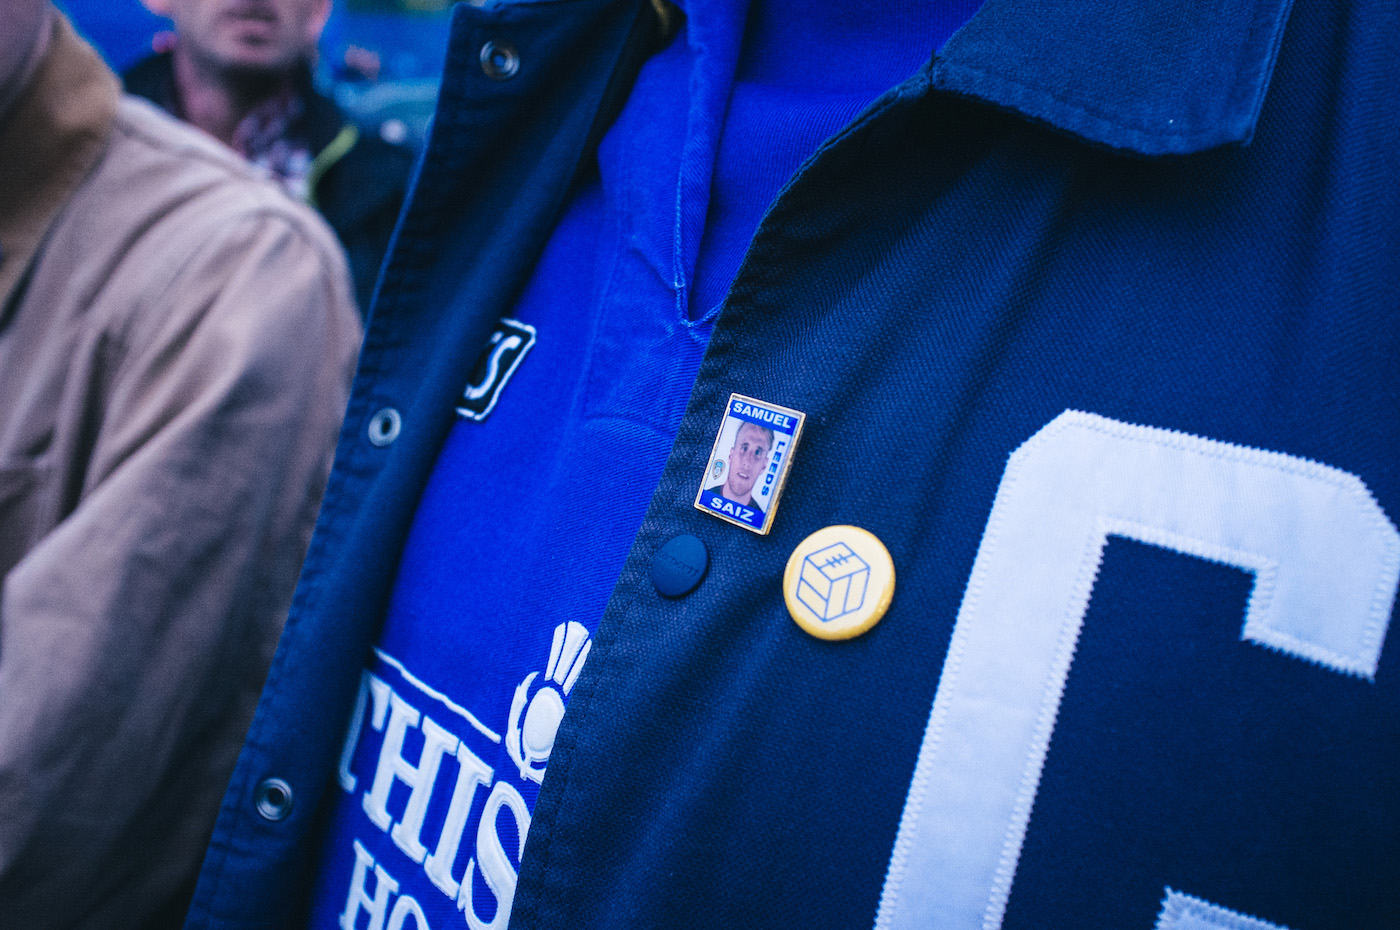 A close up of The Square Ball logo rendered on a badge, worn on a fan's jacket.